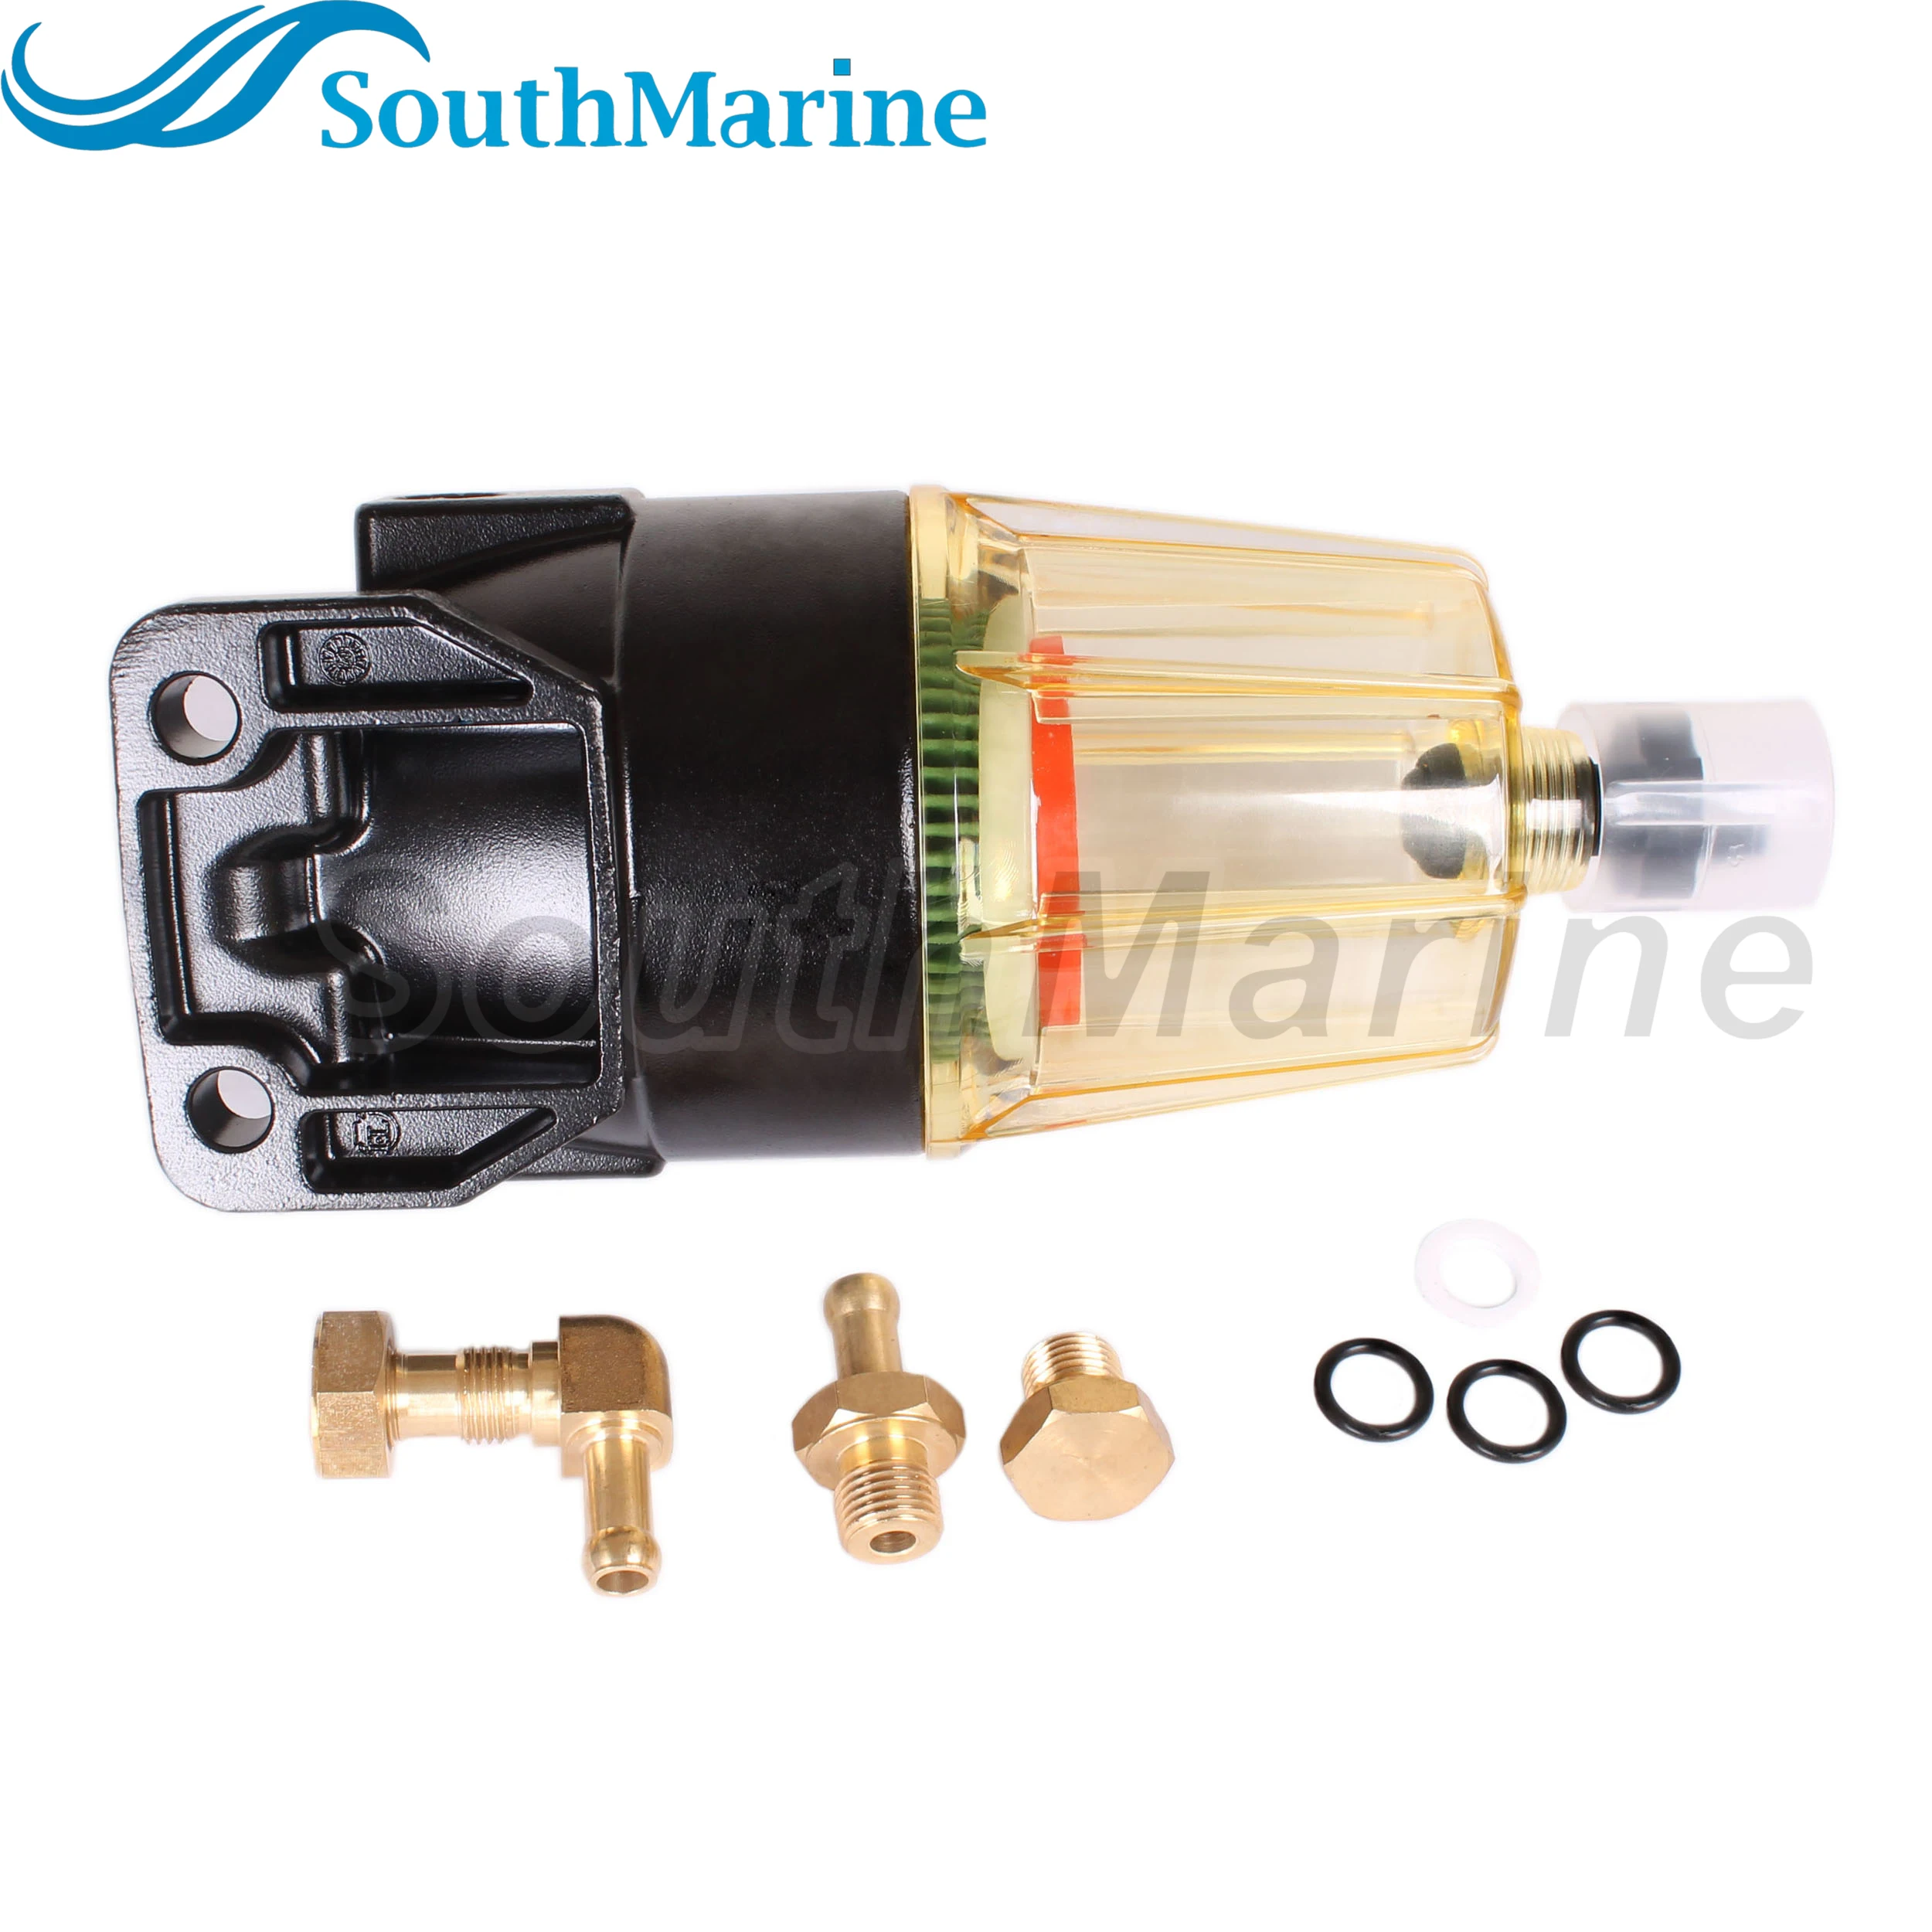 outboard-motor-90794-46905-90794-46906-90798-1m674-90798-1m742-90794-46870-fuel-filter-water-separator-for-yamaha-up-to-300hp